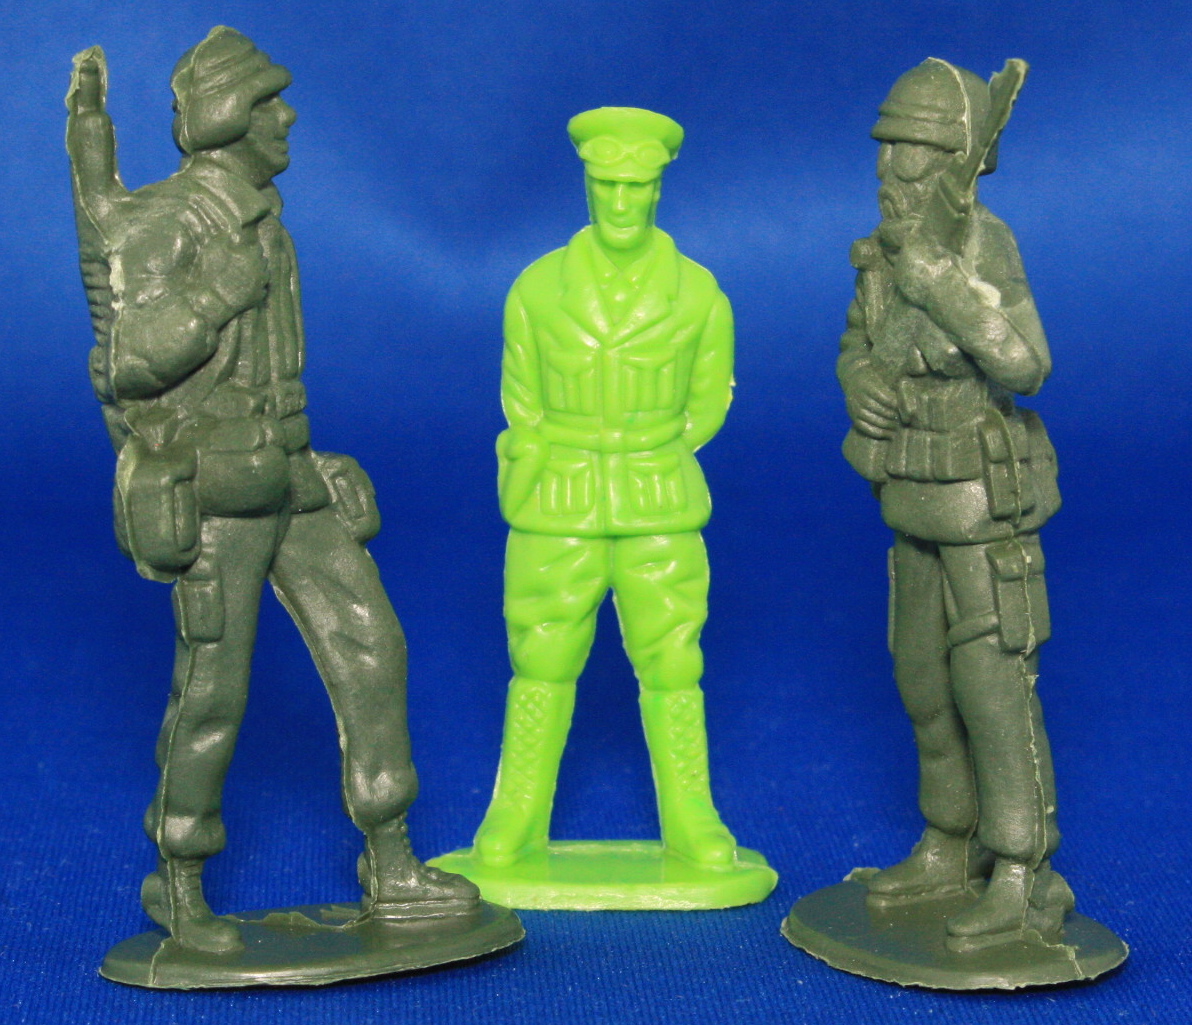 What is the origin of the plastic army men toys?